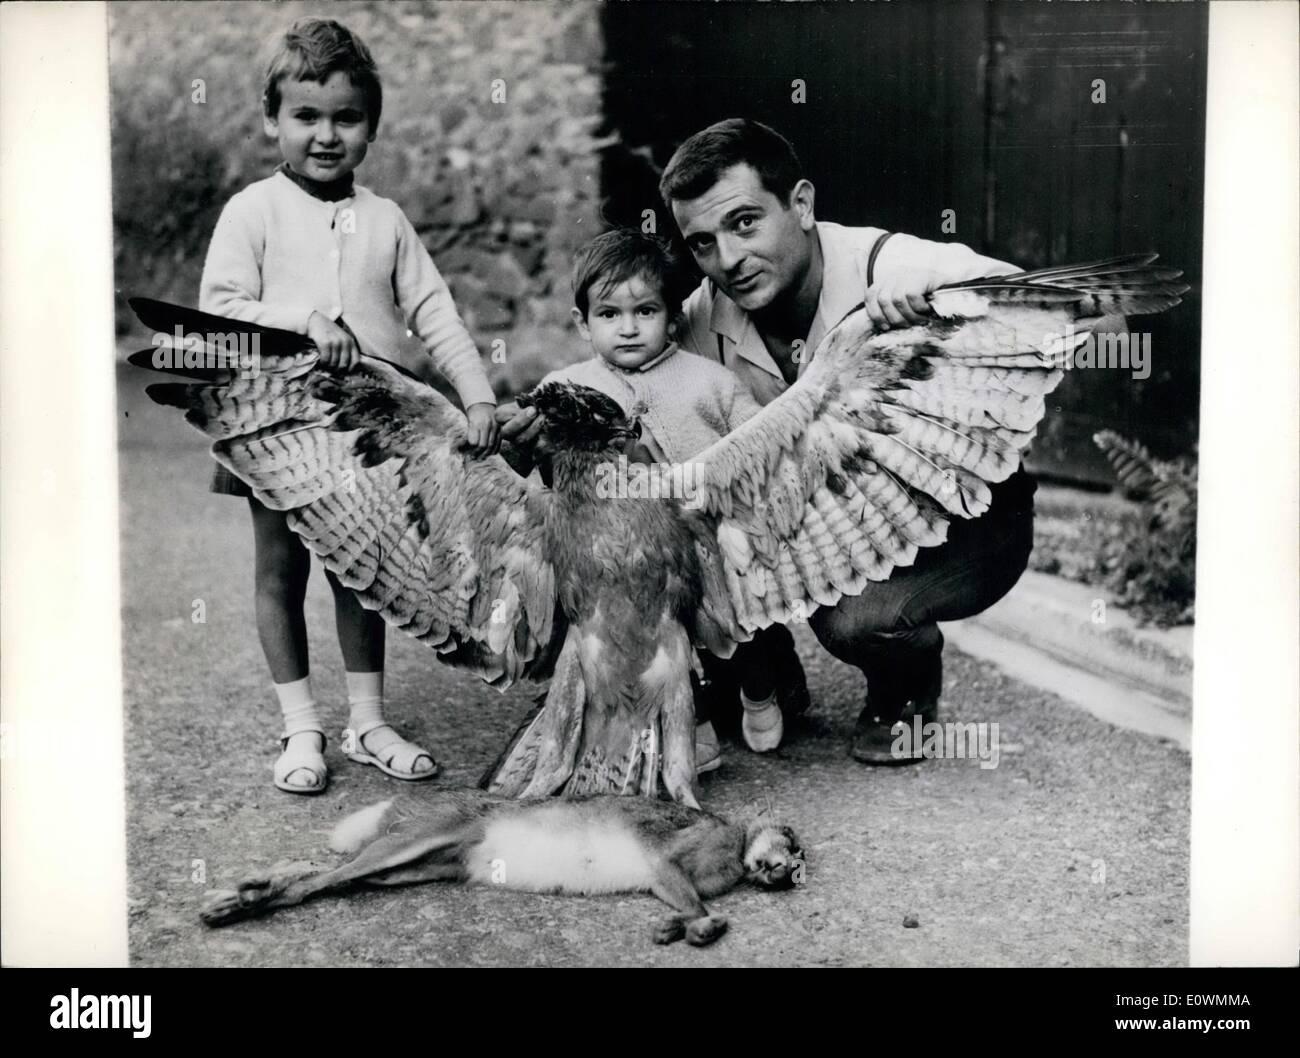 Sep. 09, 1963 - The Hunter, The Great Horned Owl and the Hare: Robert Bombail was out hunting during his holidays at Pouzolsminervois (Indre, France) when with a master shot he shot down a great horned Owl holding in its claws a hare, which weighed 69 pounds, while the horned Owl measures outstretched 1m.70. Picture Shows: Robert Bombail and his two children admire the horned owl and the hare. Stock Photo